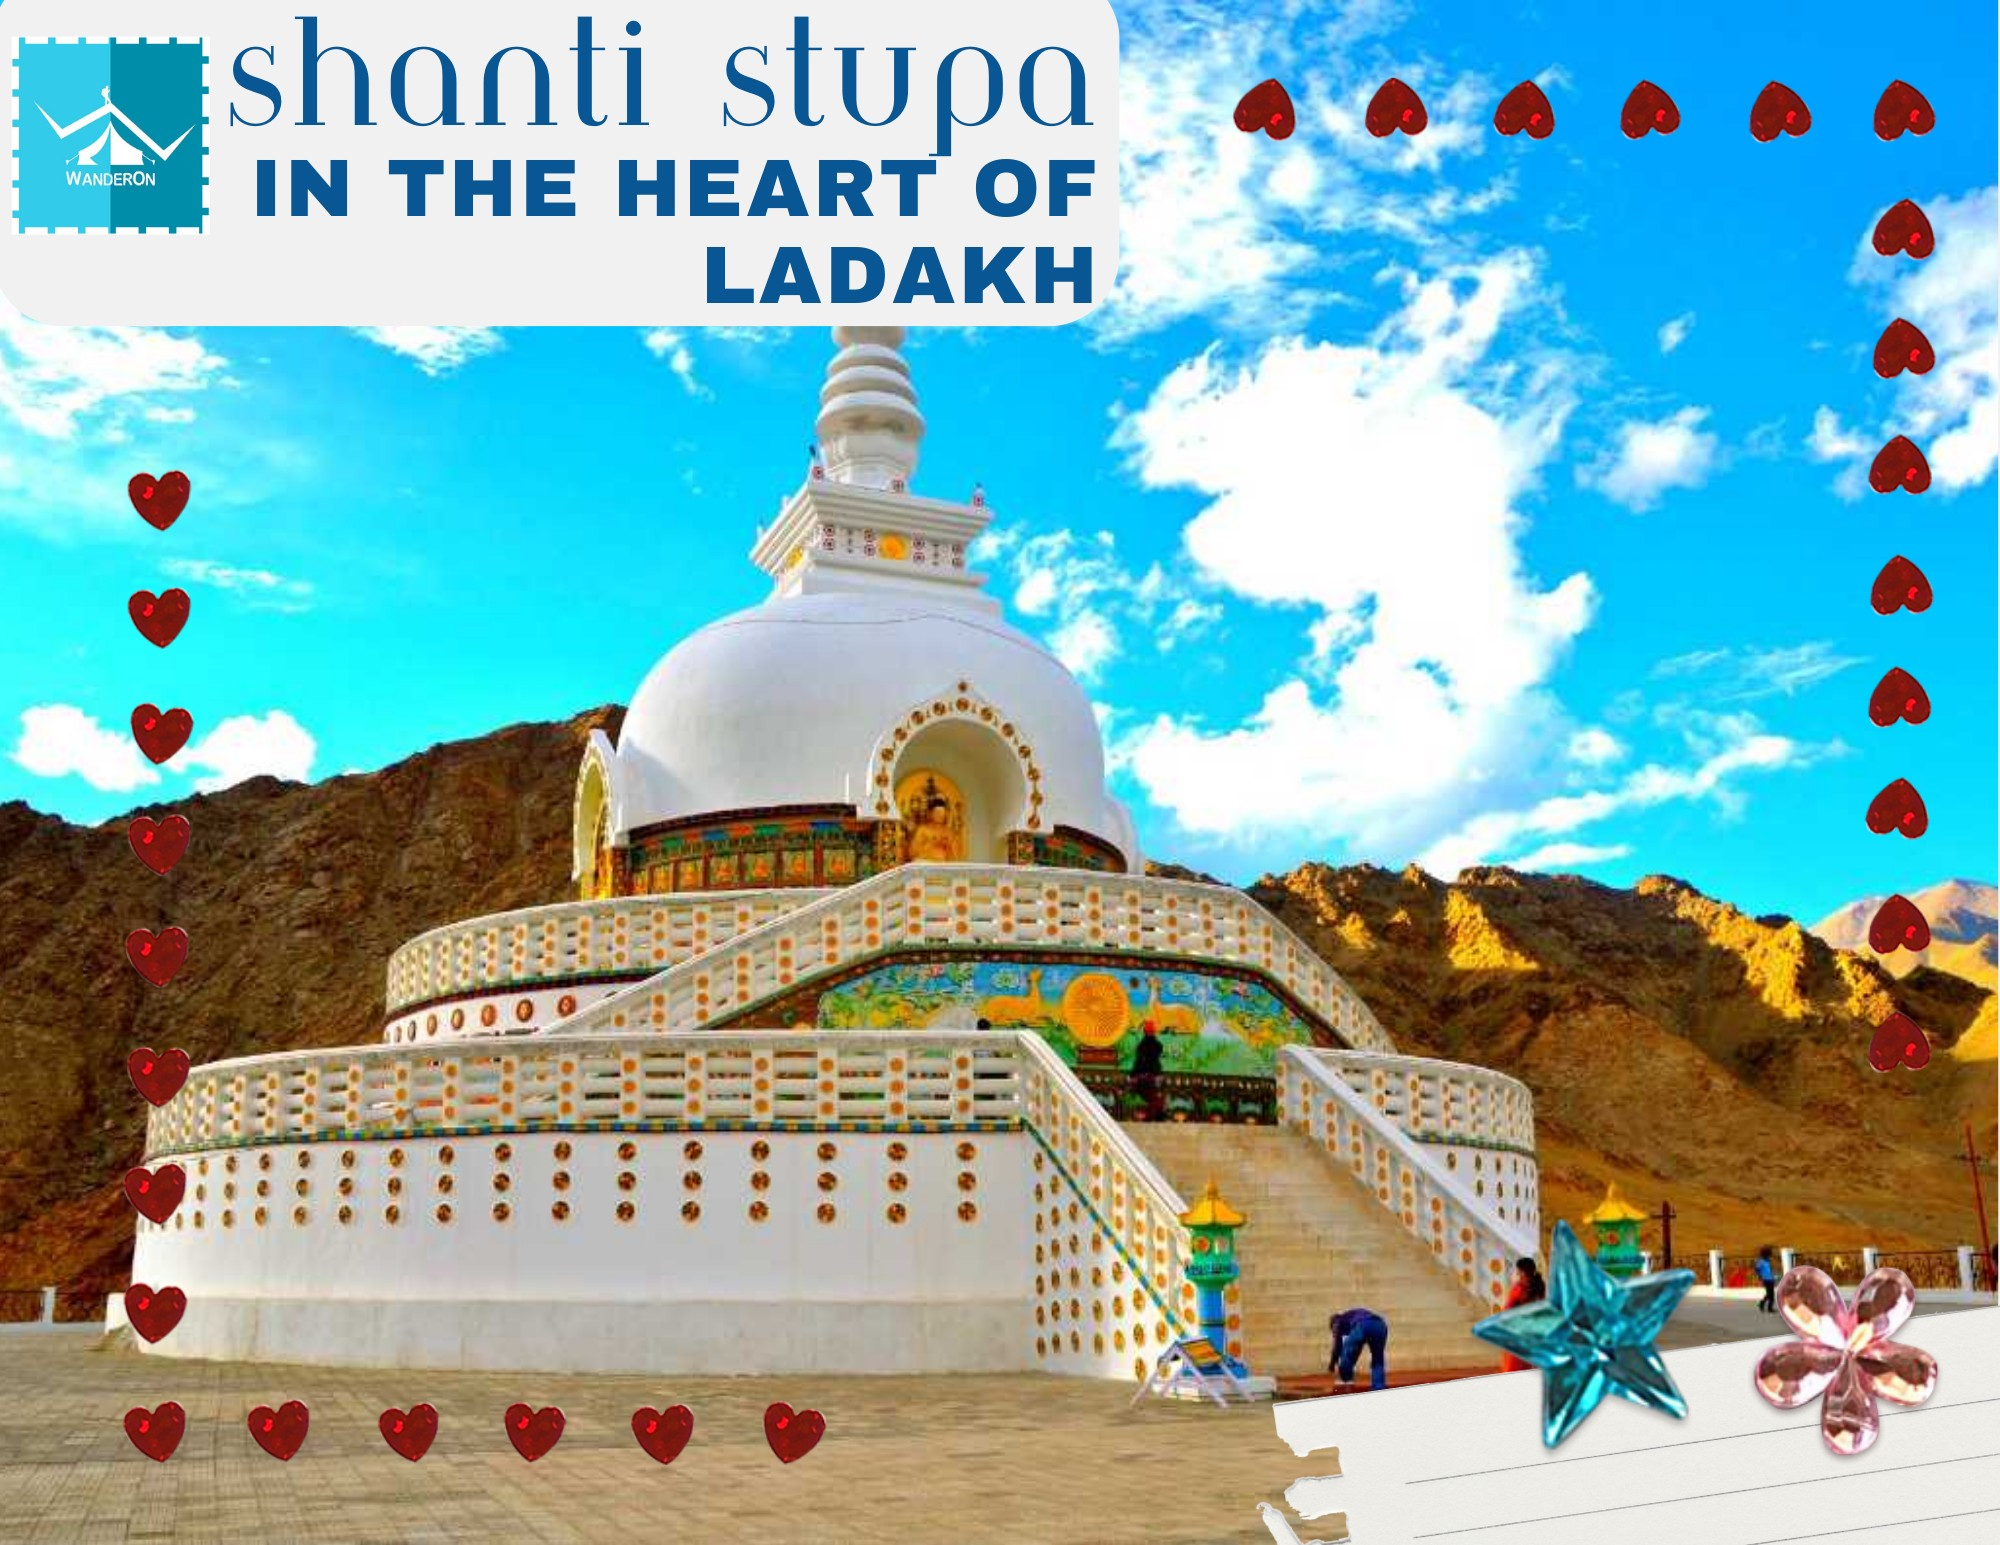 Shanti Stupa: A Tranquil Oasis in the Heart of Ladakh